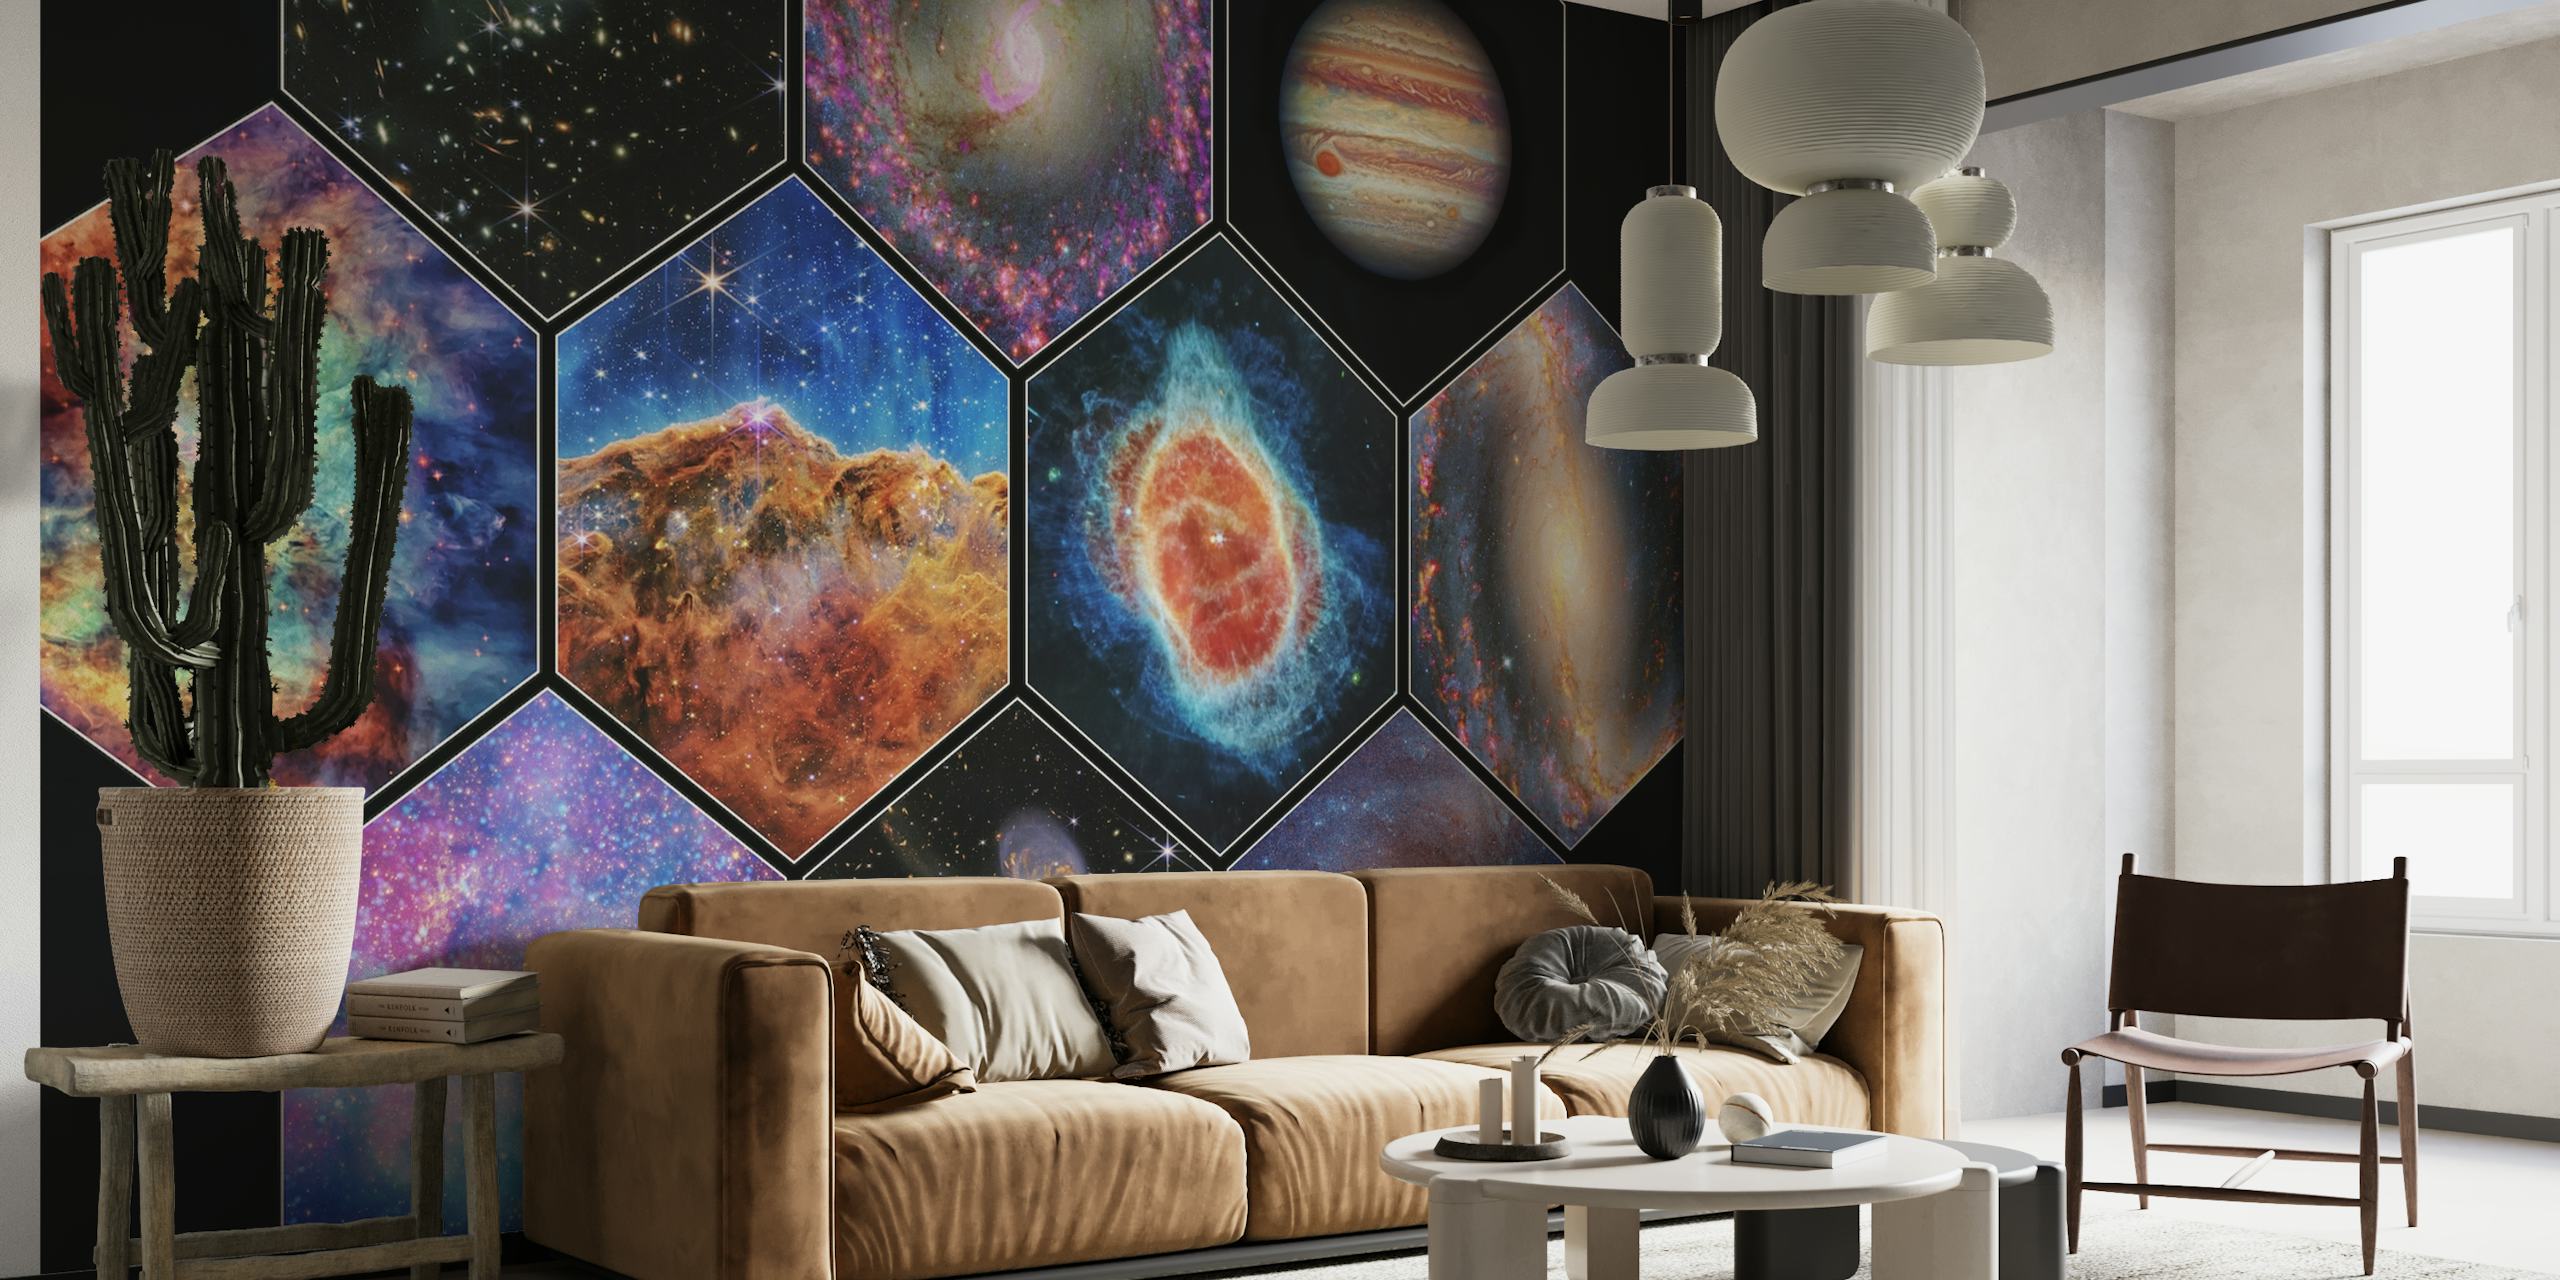 Space-Art wall mural with a geometric honeycomb pattern featuring galaxies, nebulae, stars, and planets.